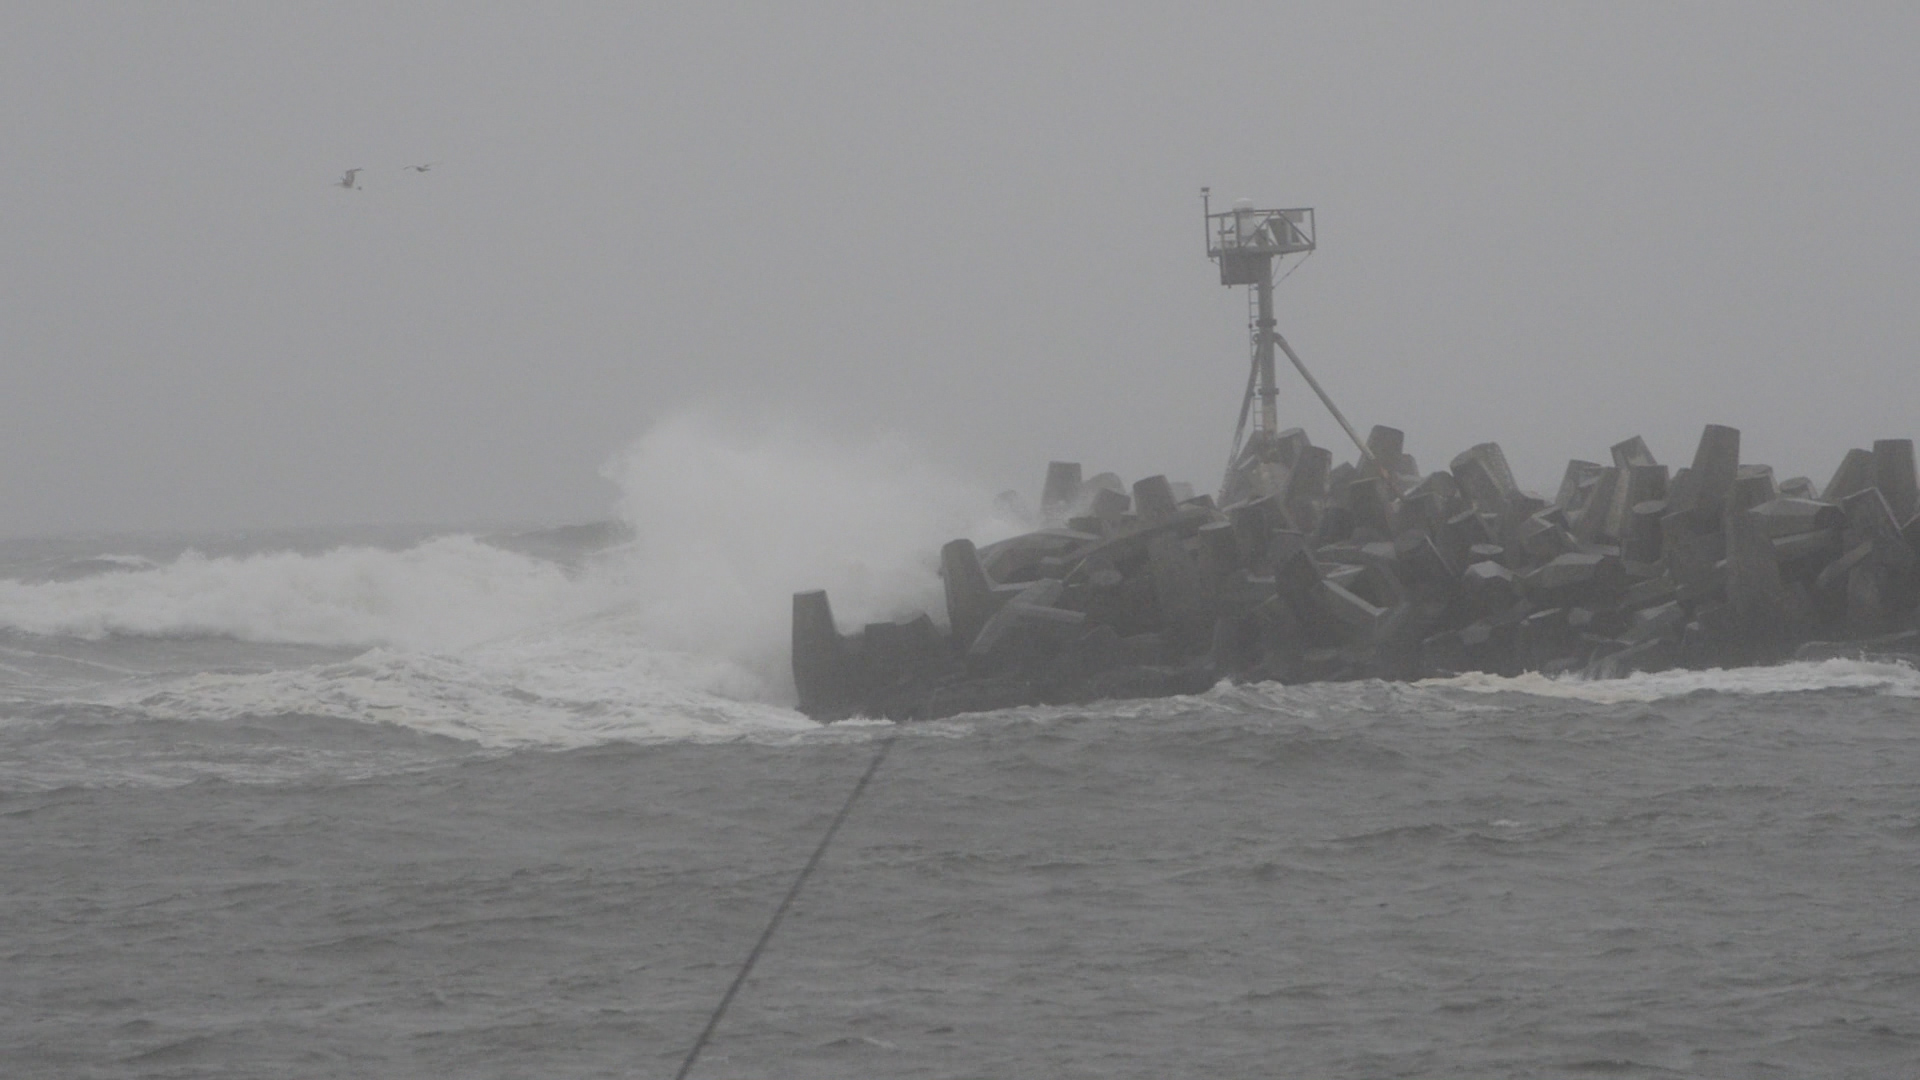 Manasquan Inlet during the May 6, 2016 storm. (Photo: Daniel Nee)